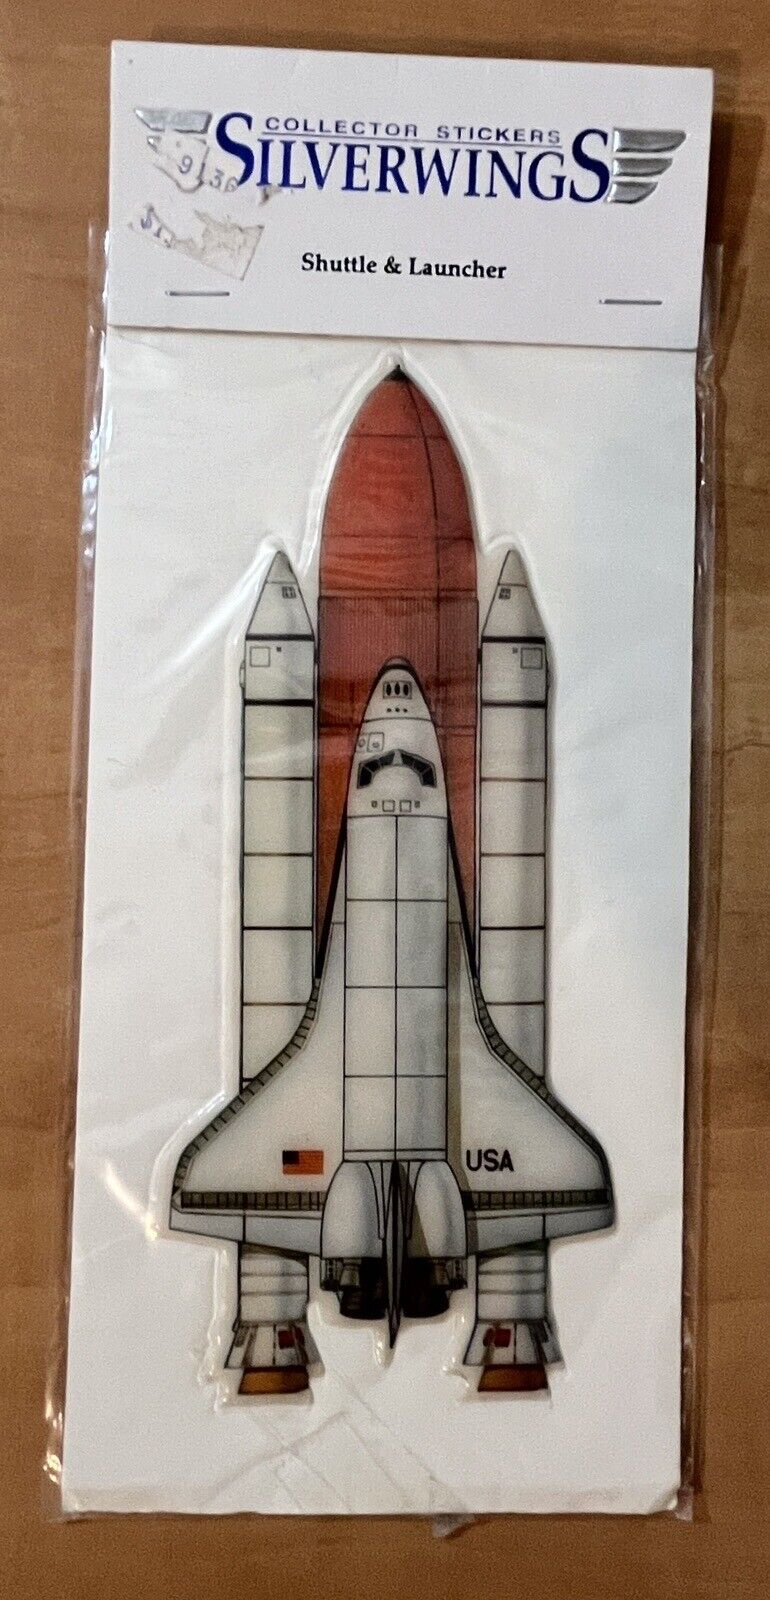 VTG 1992 SILVERWINGS Collector Stickers Shuttle & Launcher Sticker NEW